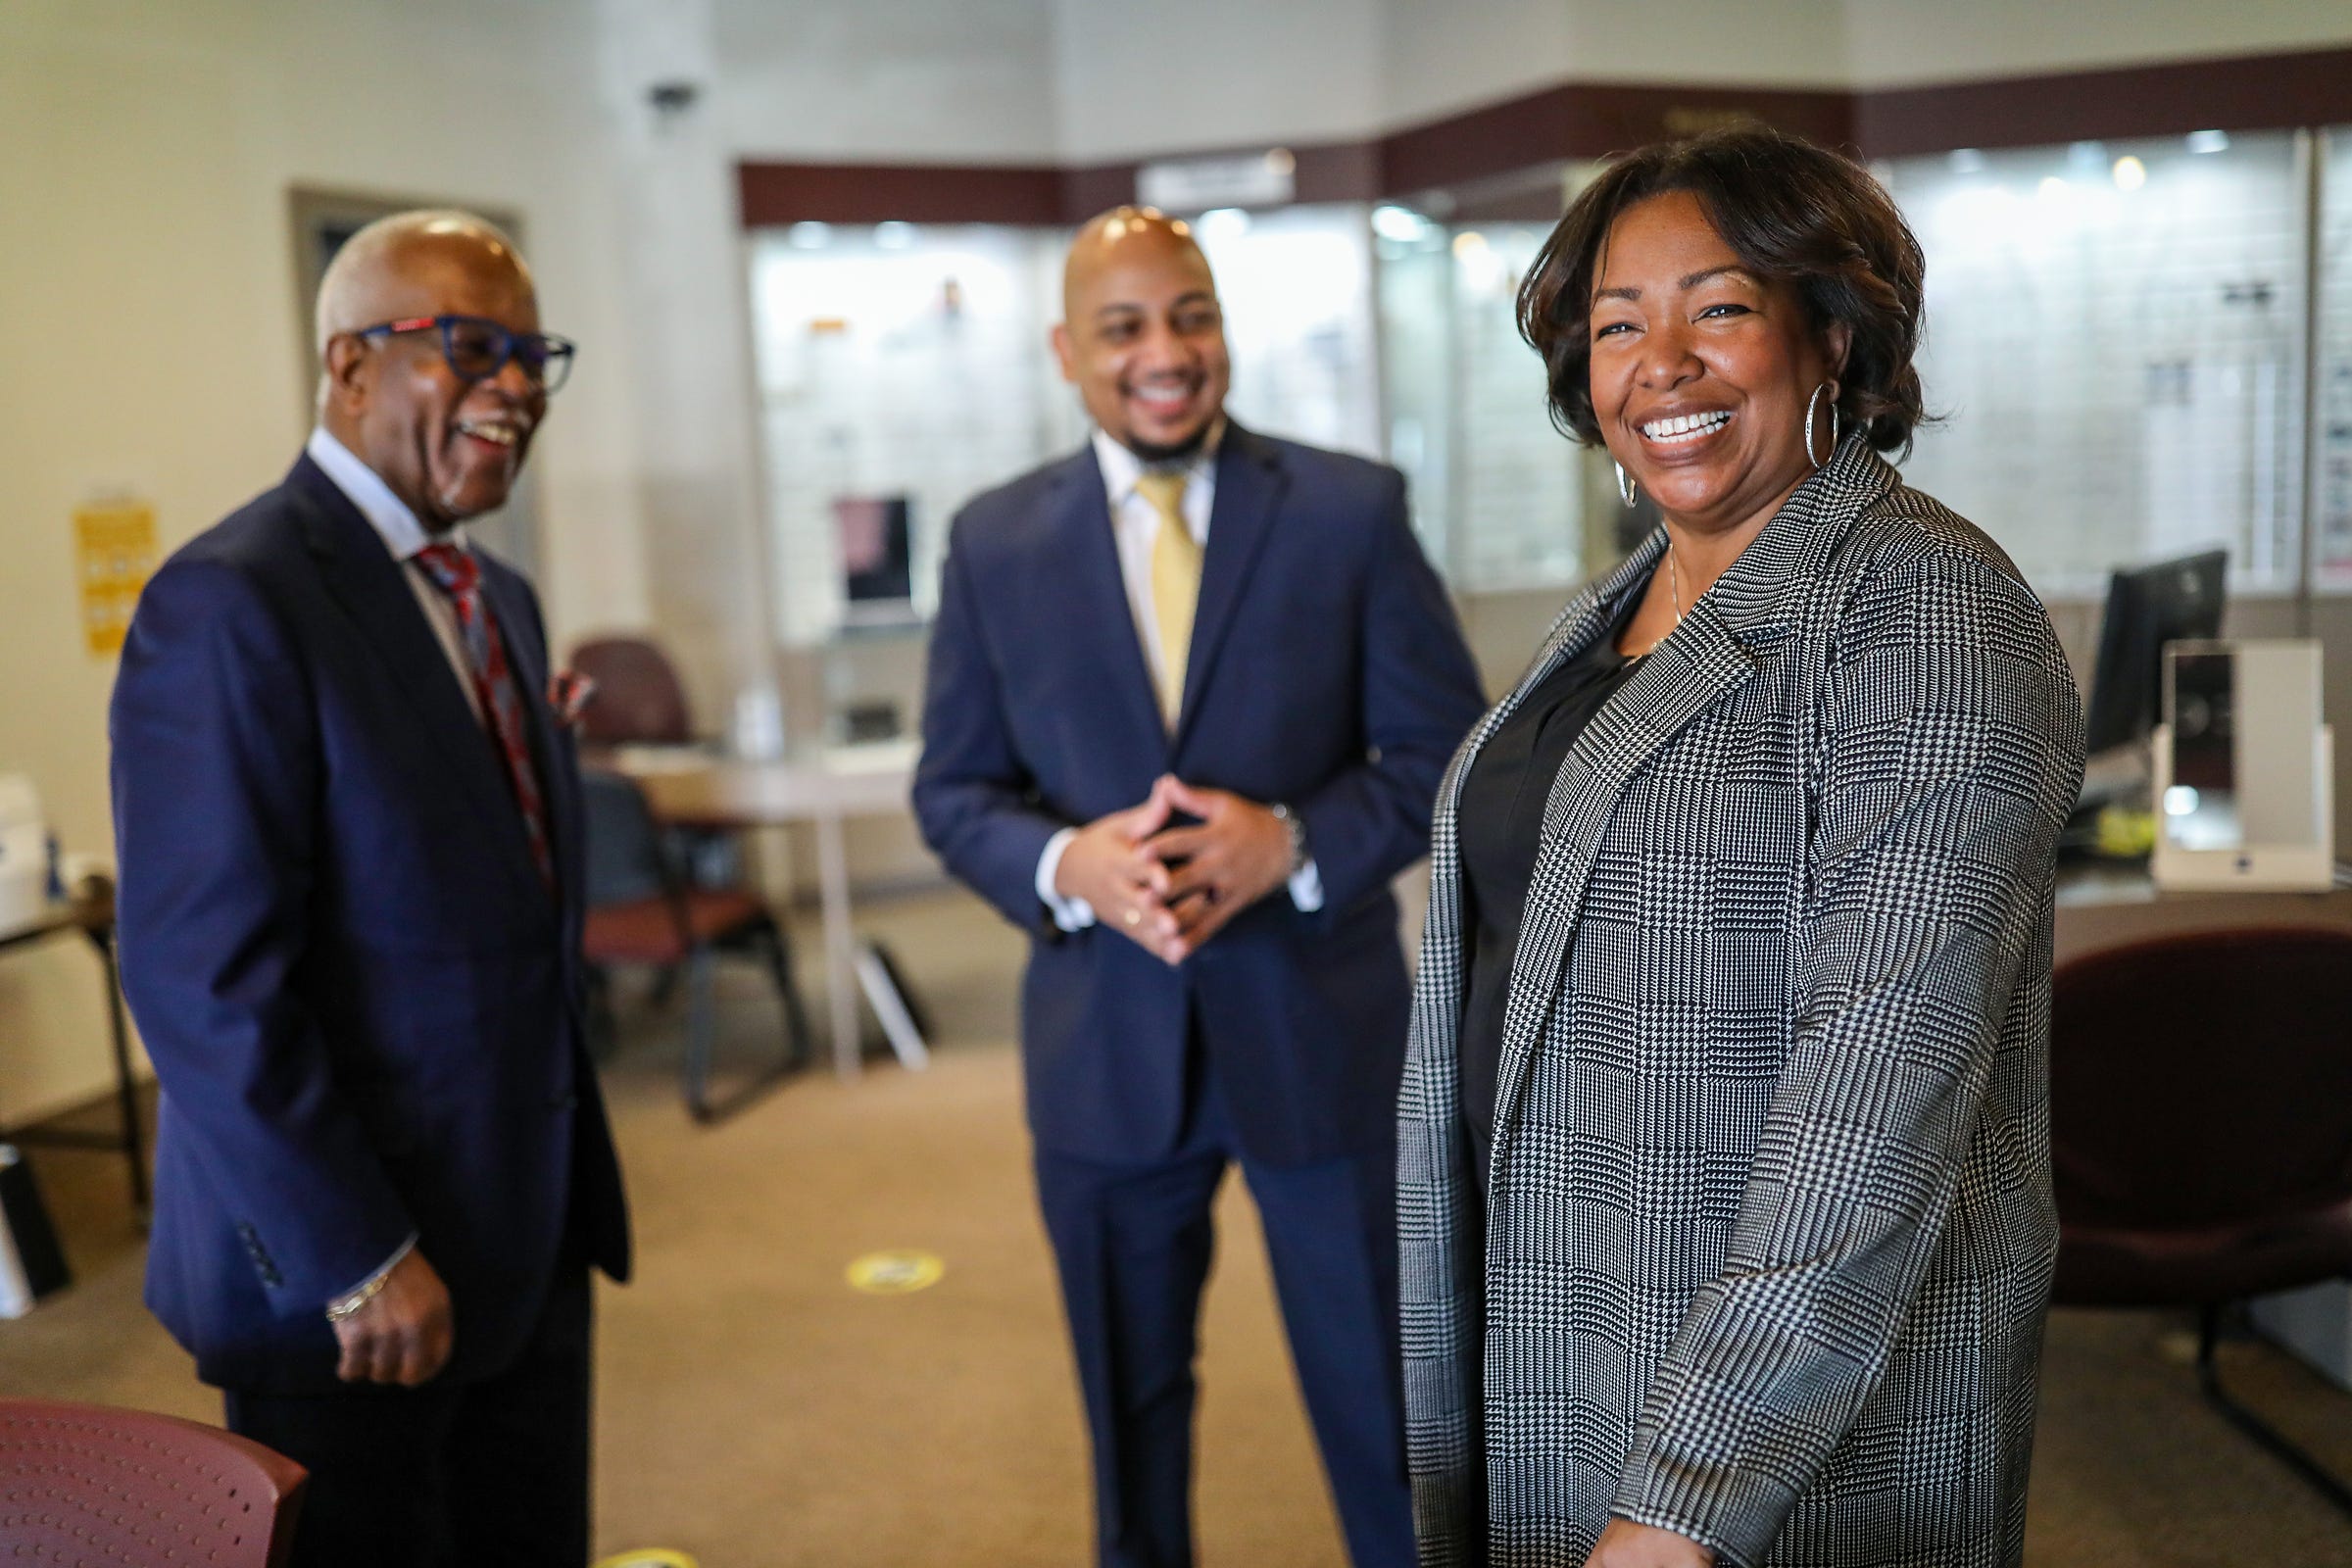 Jeanette King, Executive Director at Heritage Optical meets with the CEO of the National Business League INC. Ken Harris, center,  and the owner of Heritage Optical George P. Barnes Jr. at their location in Northwest Detroit on Friday, Jan. 21, 2022. The Heritage Group is a national brand that is in all 50 states.